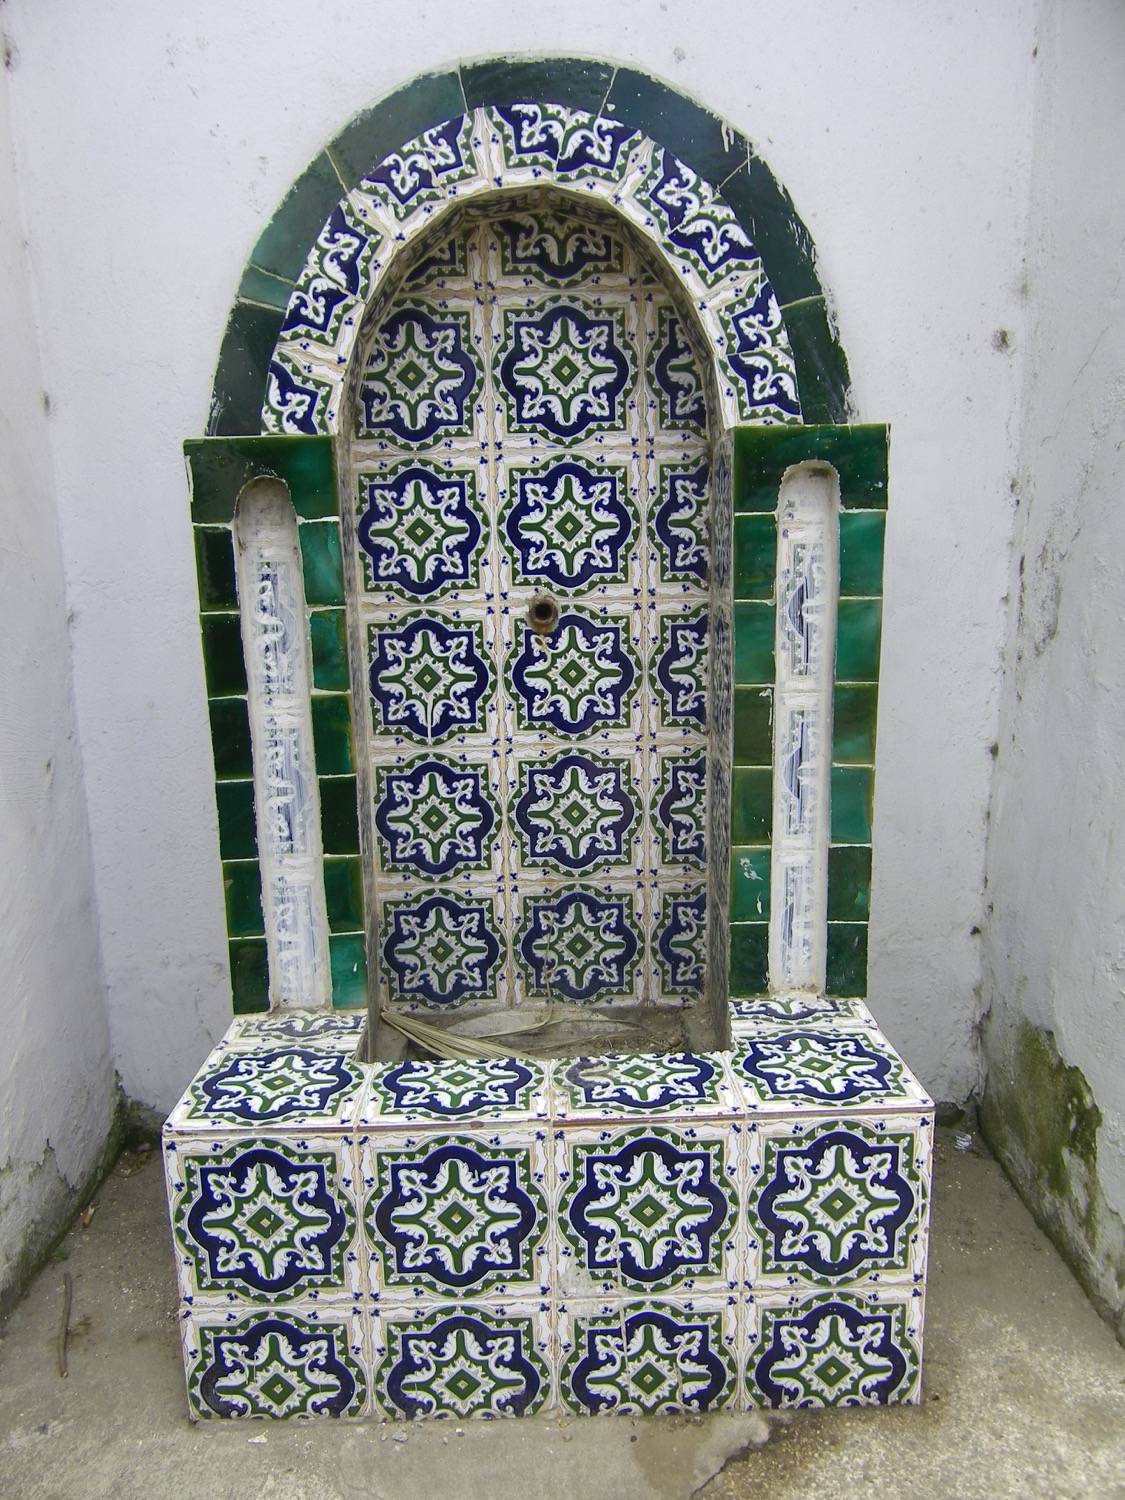 Fountain niche decorated with ceramic tiles (faience) in the Musée National des Antiquités